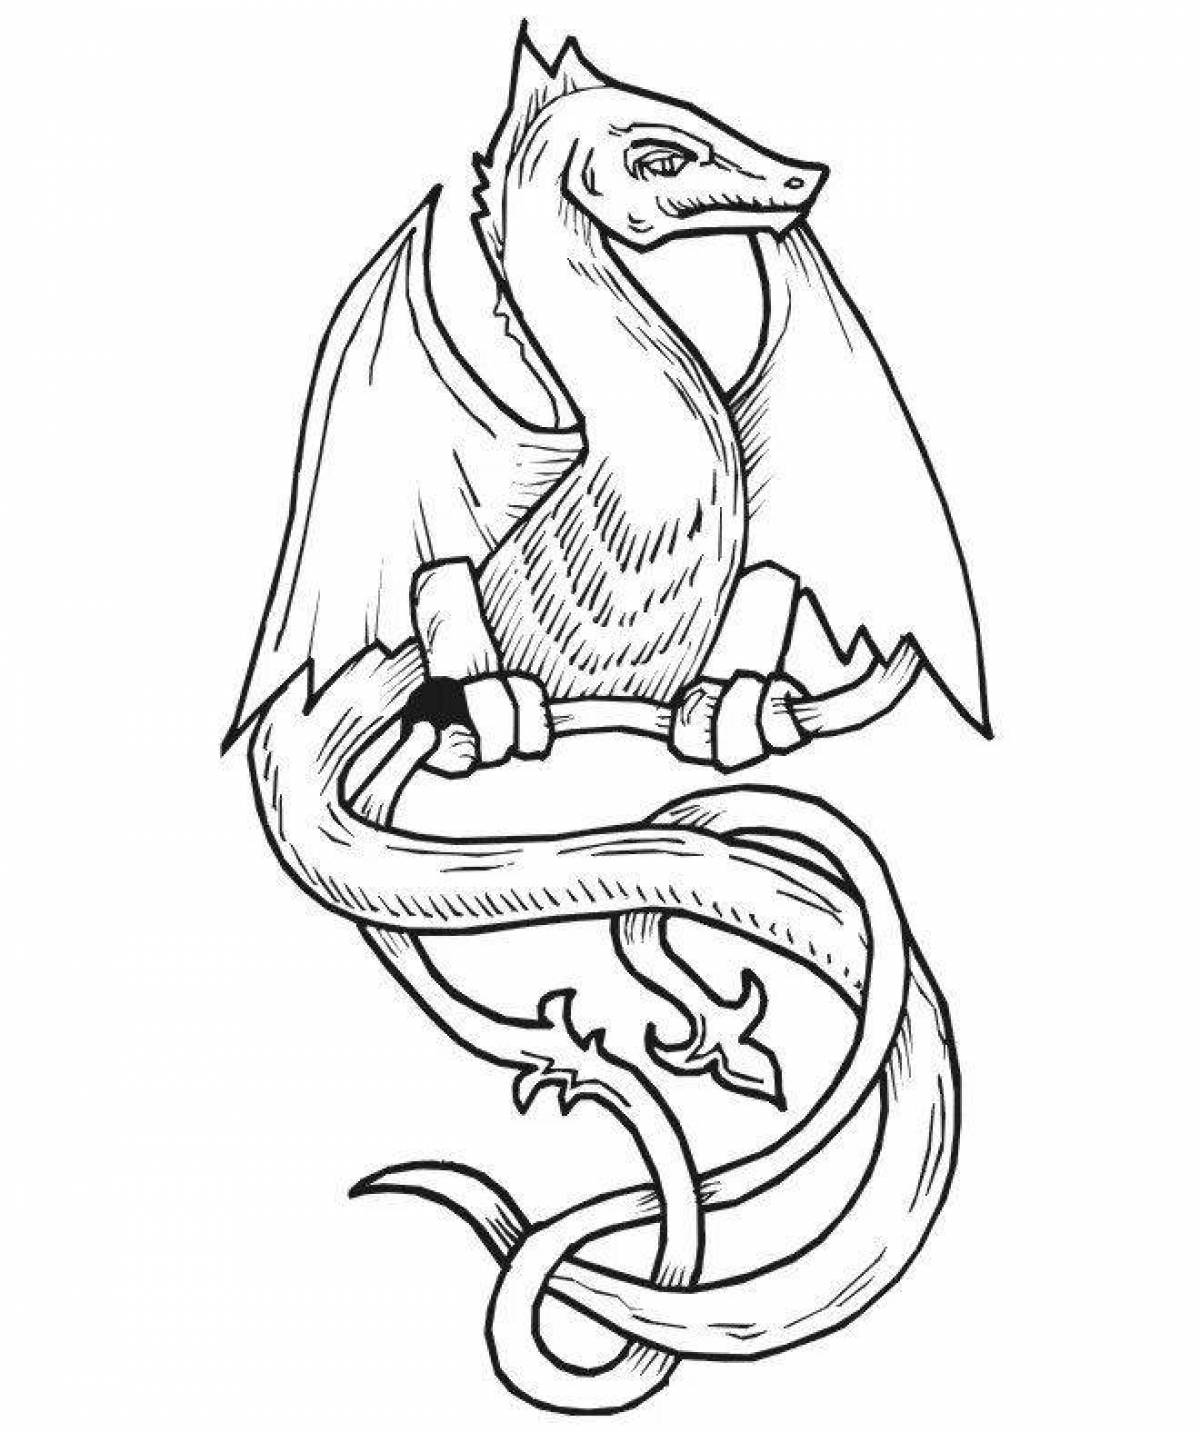 Fantastic animal coloring pages